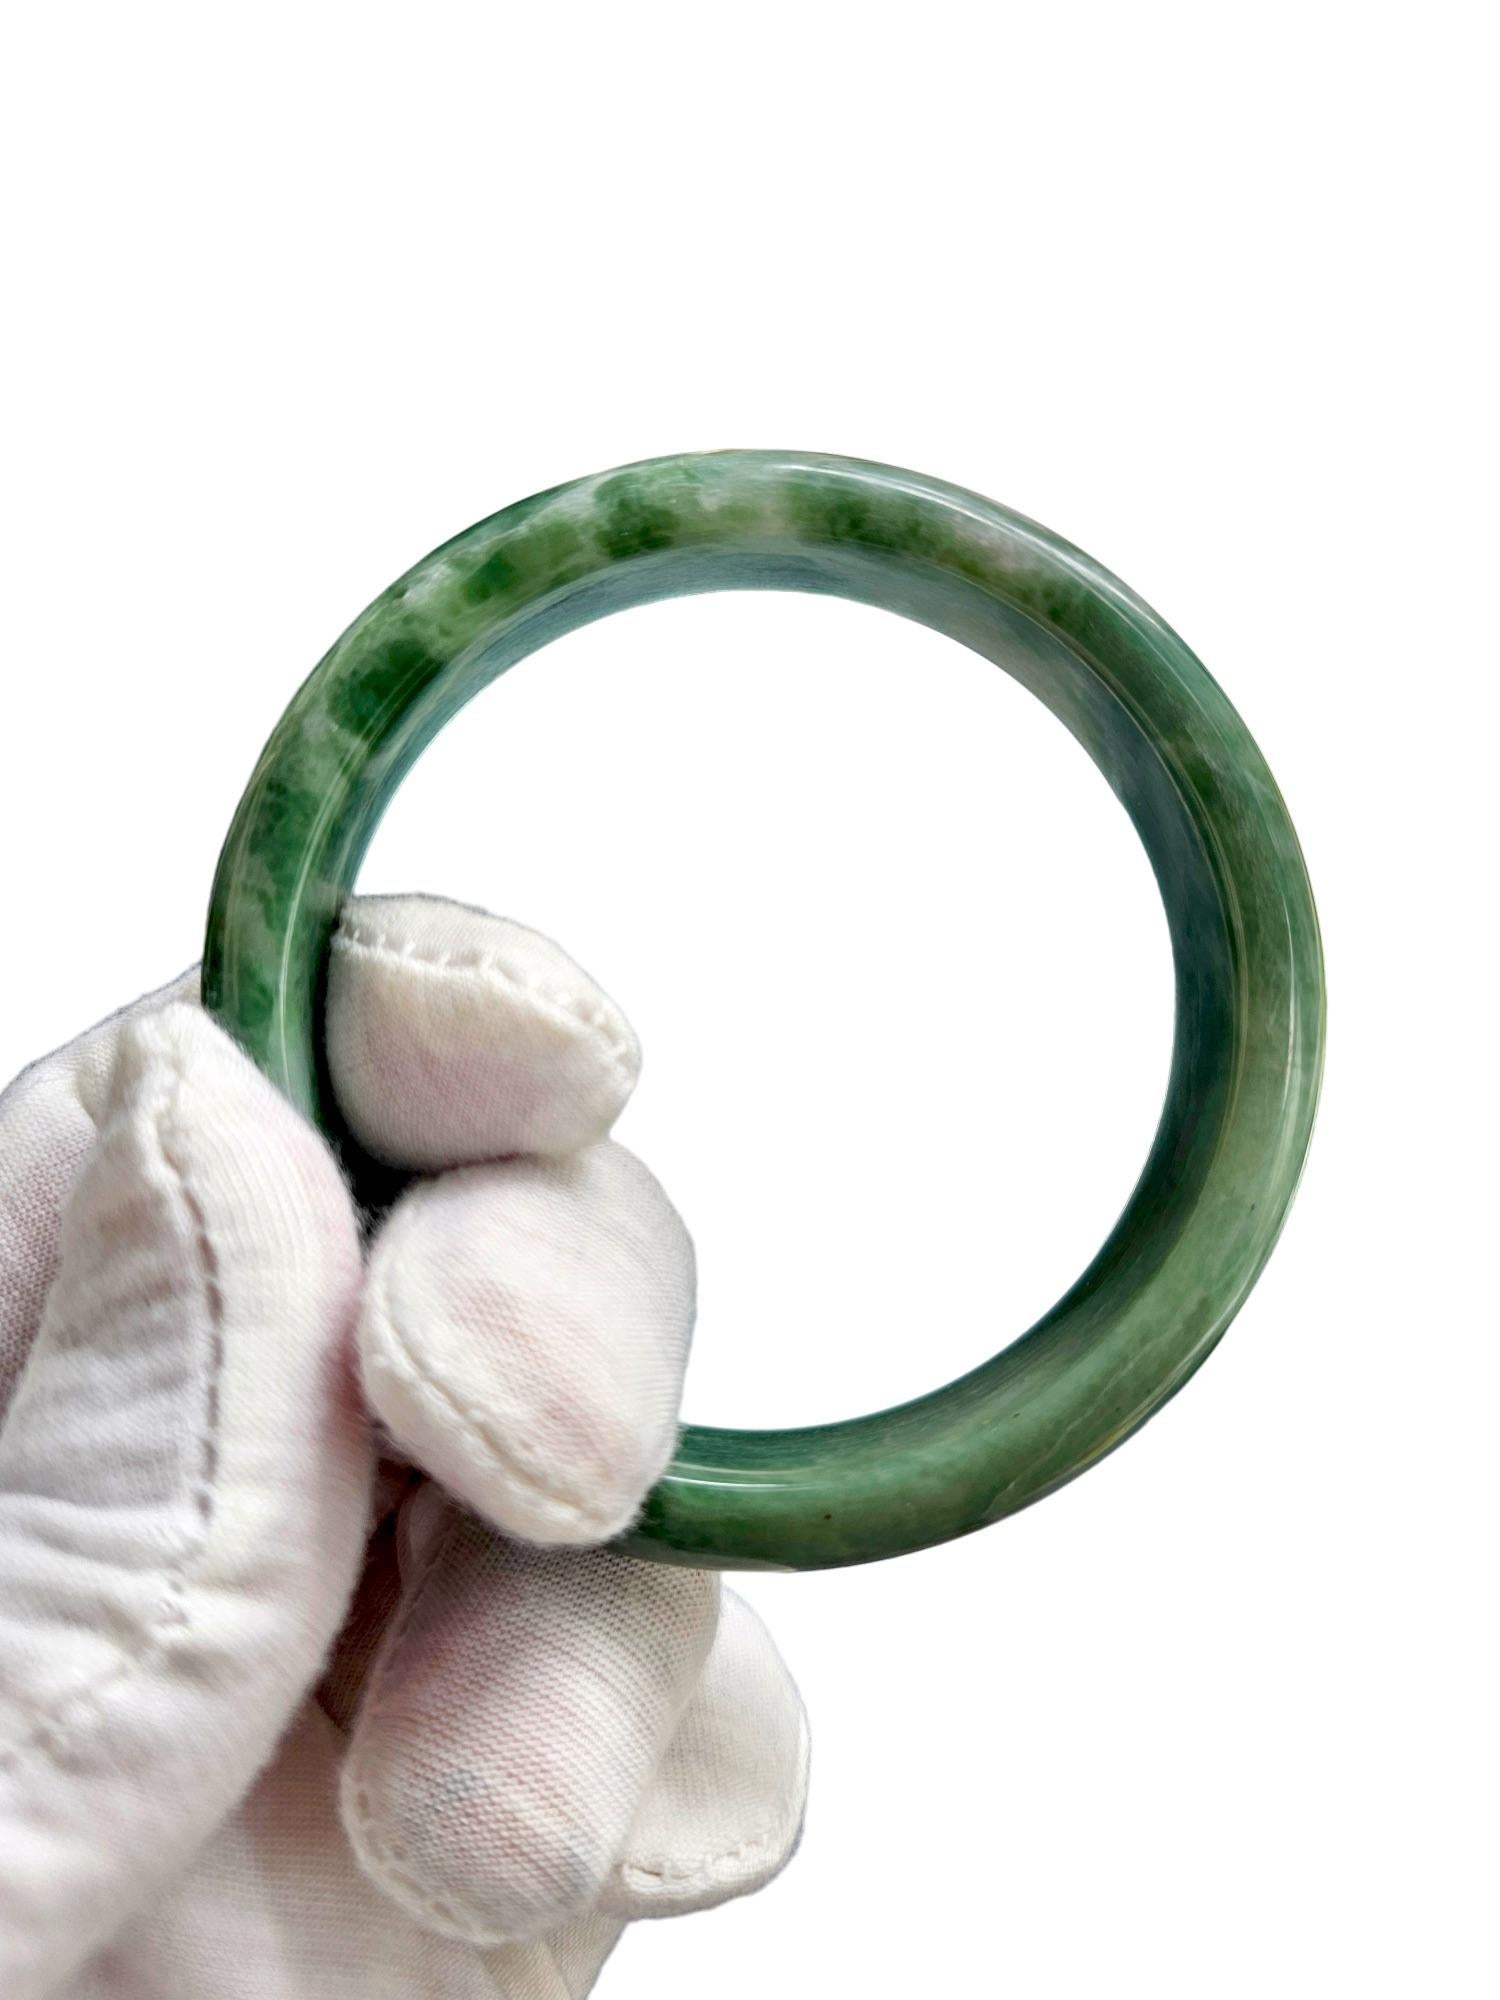 Earth's Burmese A-Jade Bangle Bracelet (MADE IN JAPAN) Green Jadeite 08808 In New Condition For Sale In Kowloon, HK